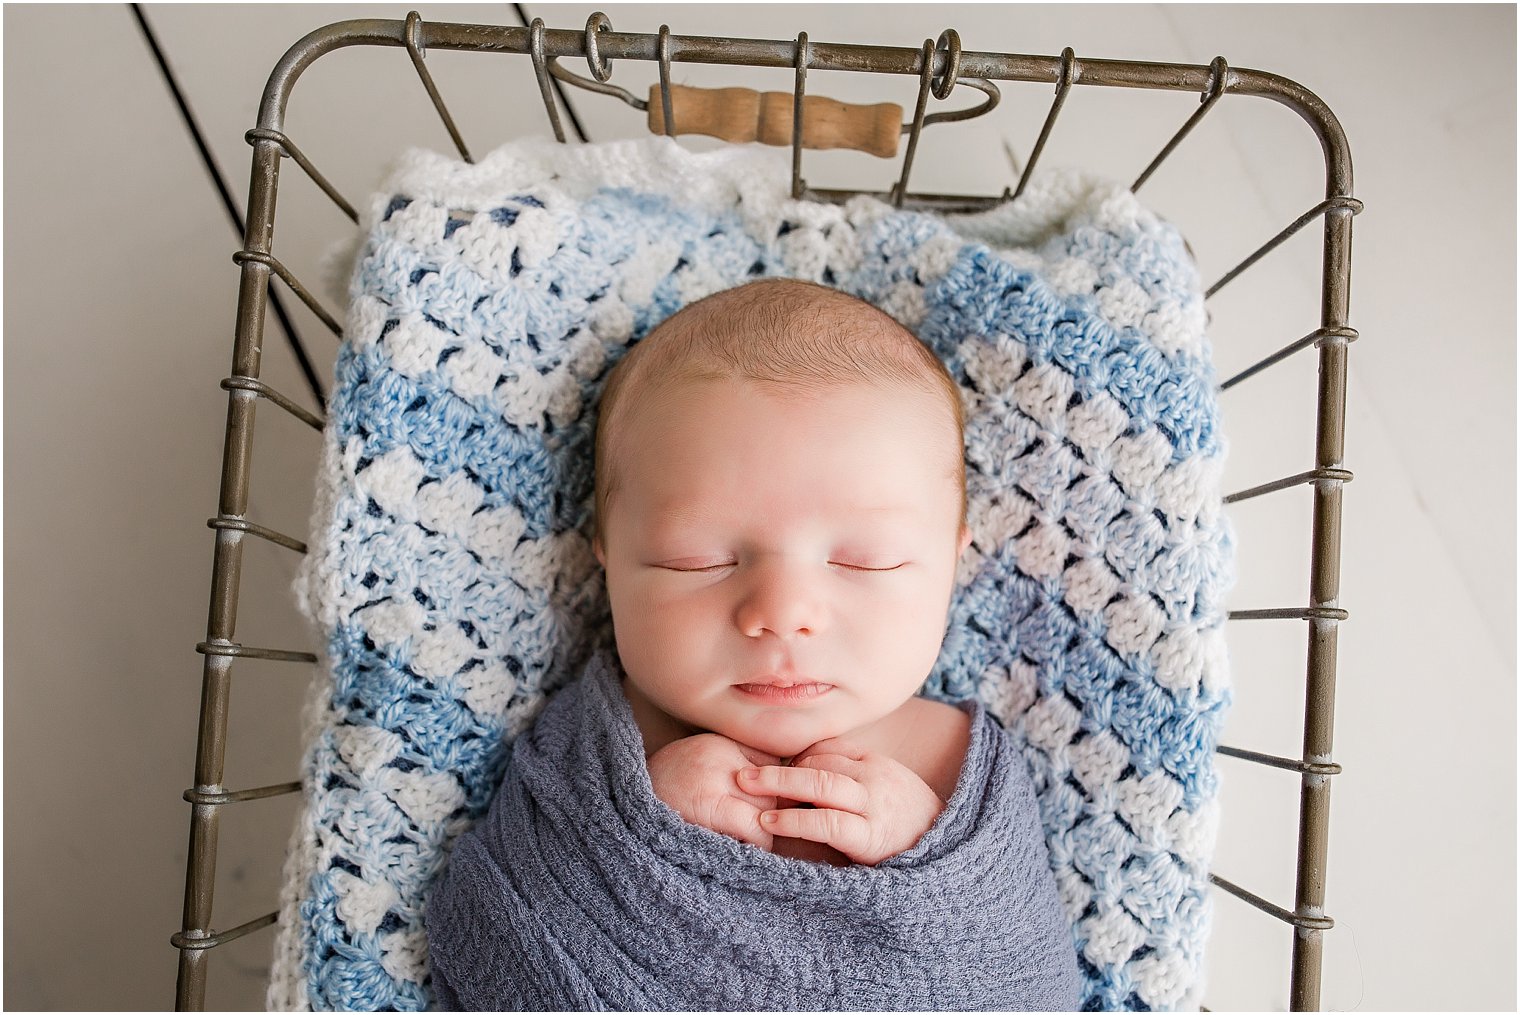 Baby with knit blanket